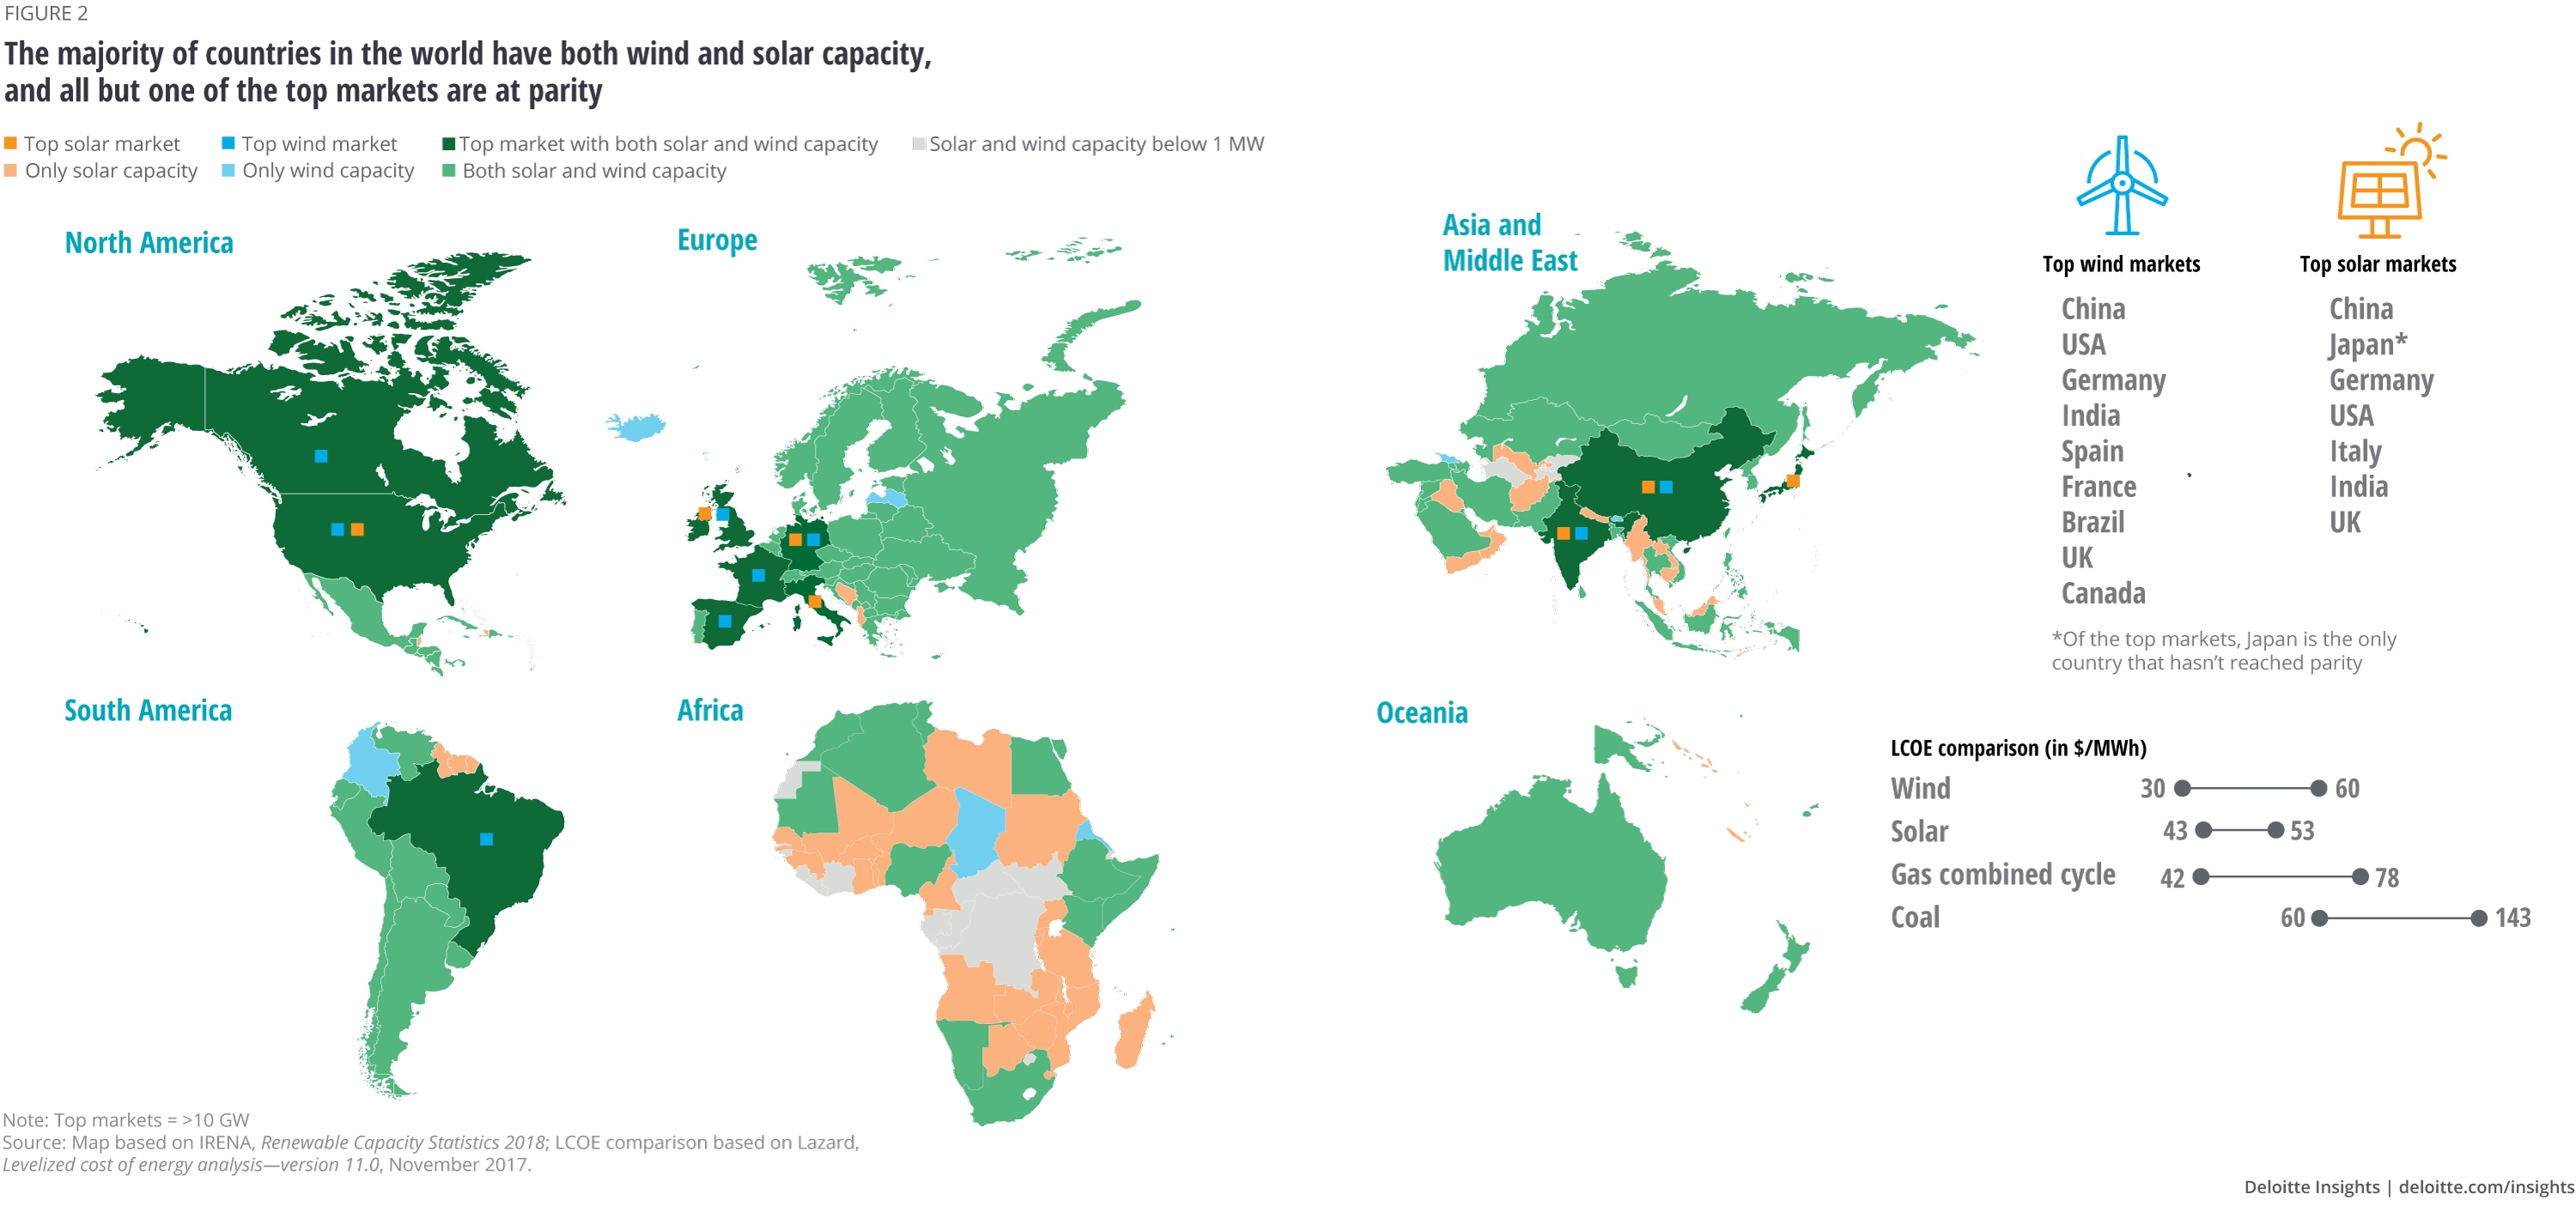 The majority of countries in the world have both wind and solar capacity, and all but one of the top markets are at parity